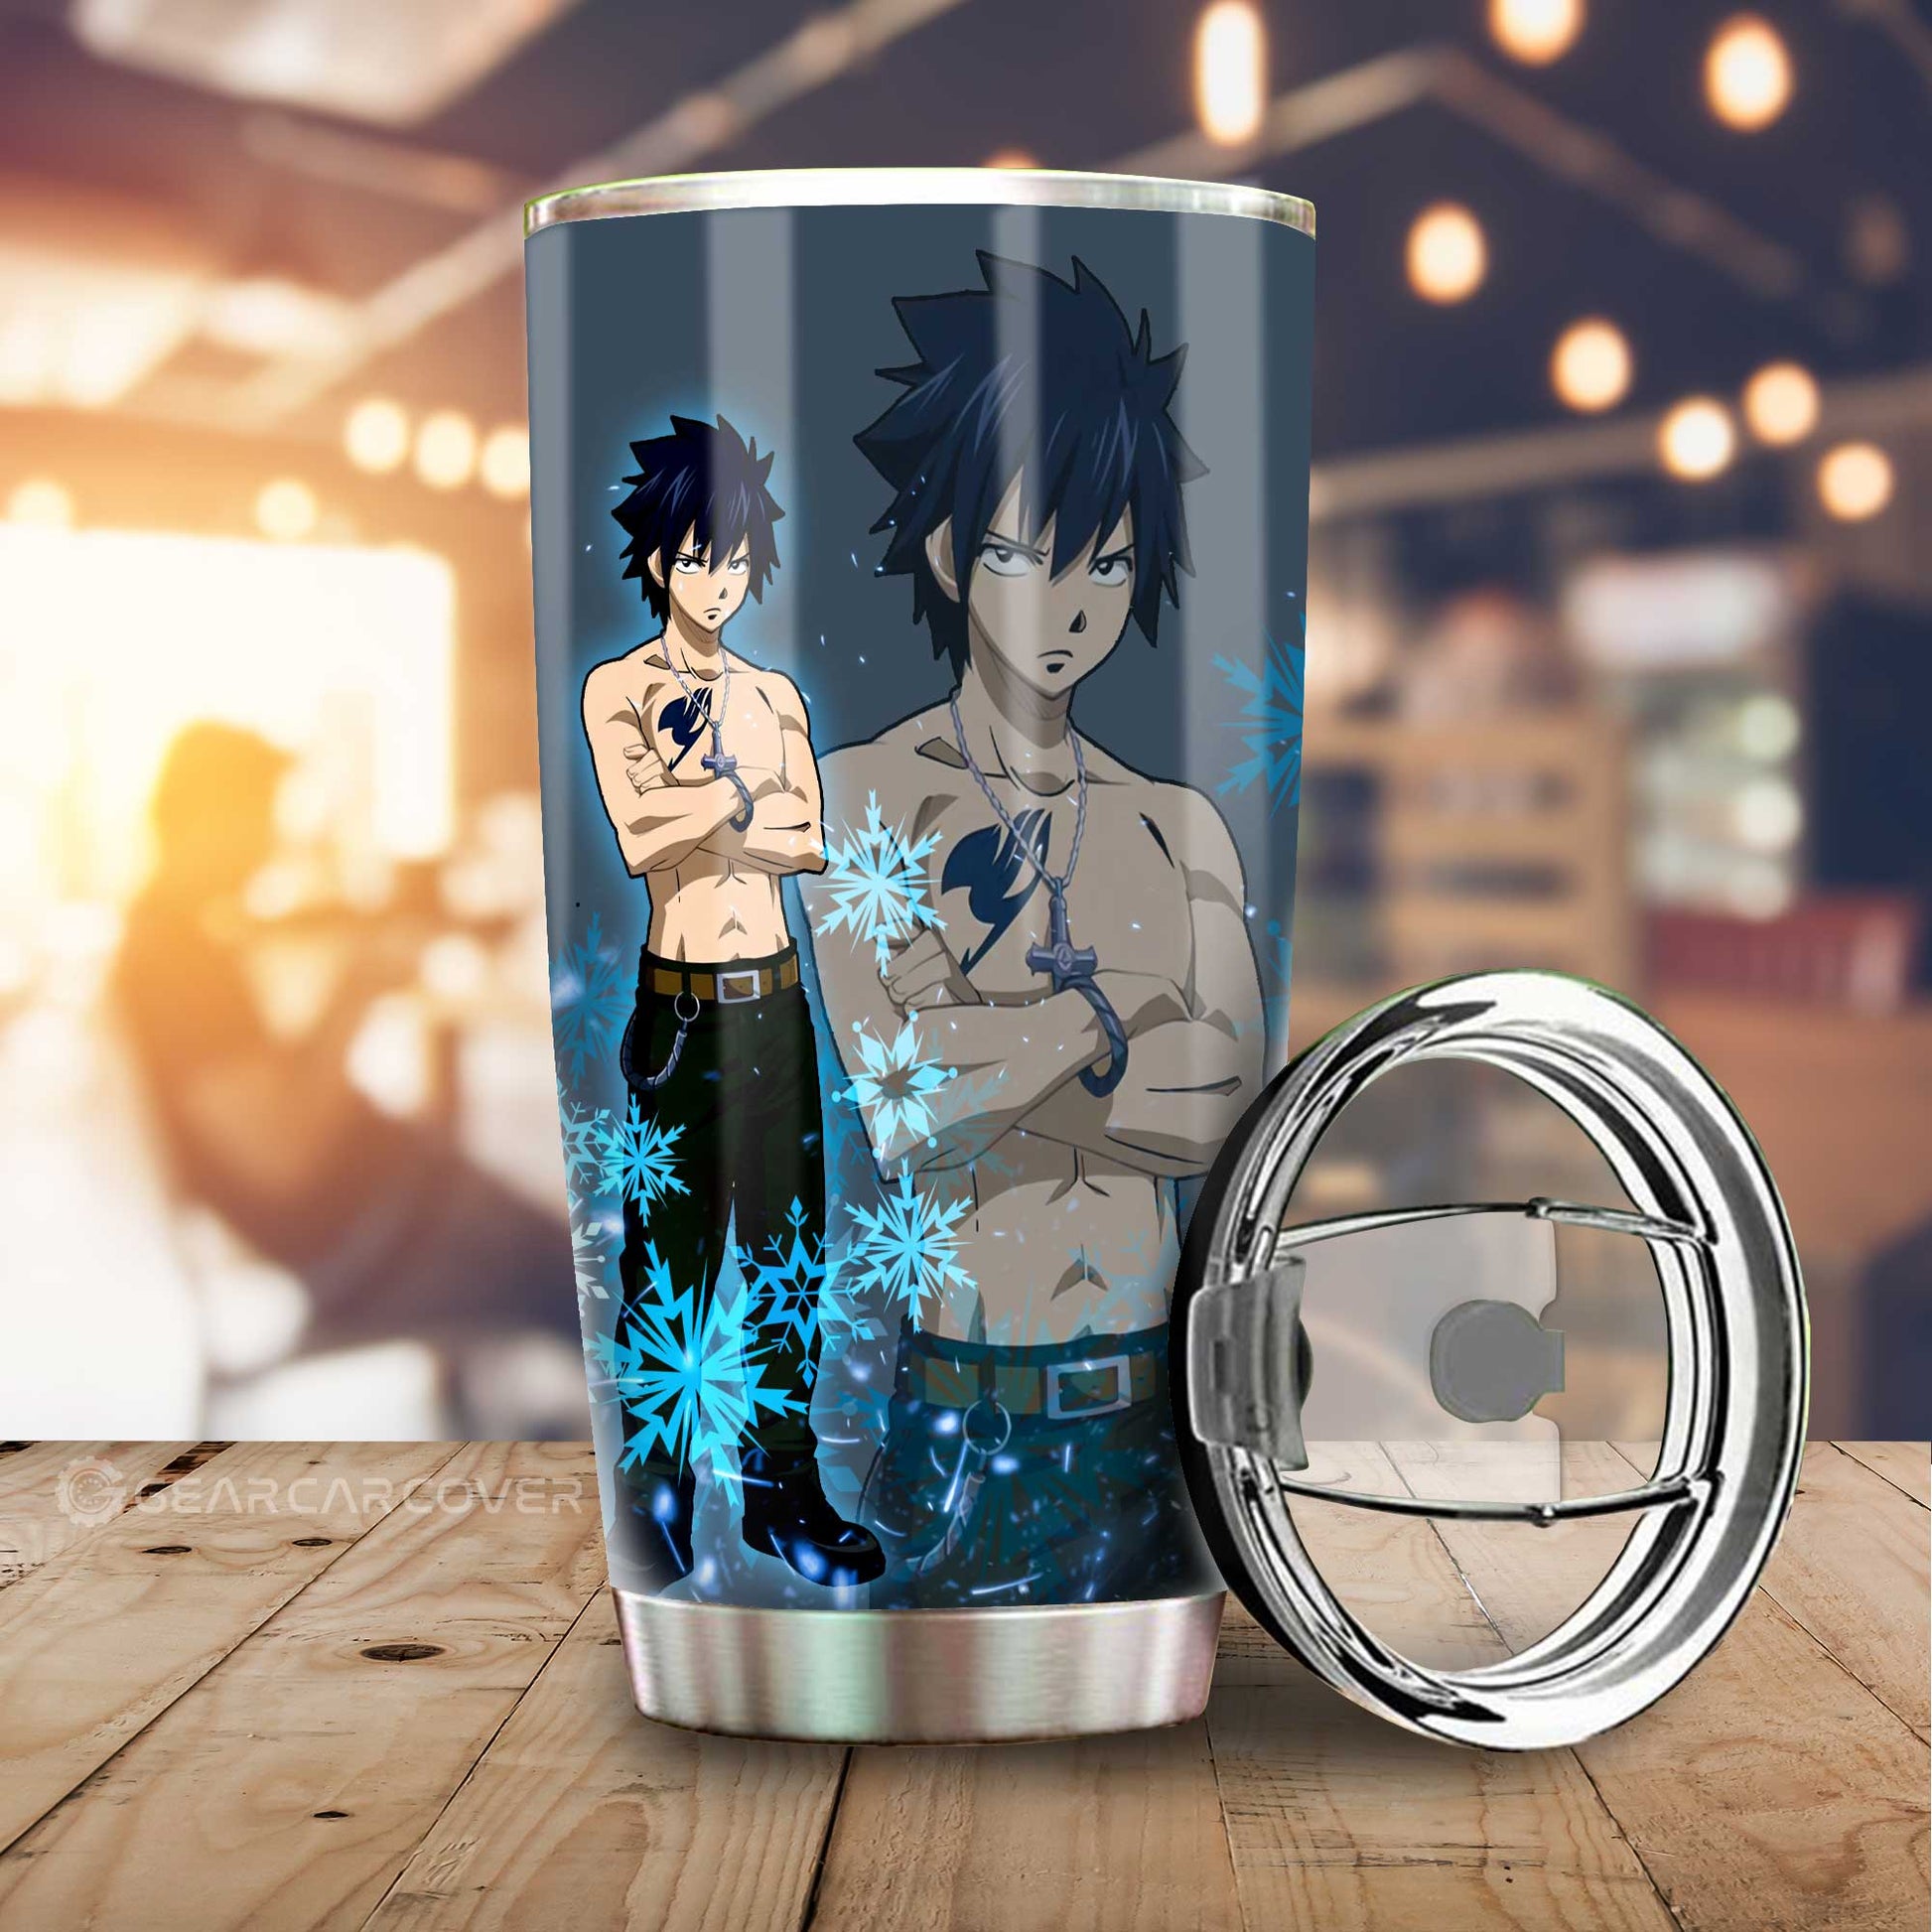 Gray Fullbuster Tumbler Cup Custom Fairy Tail Anime Car Accessories - Gearcarcover - 1